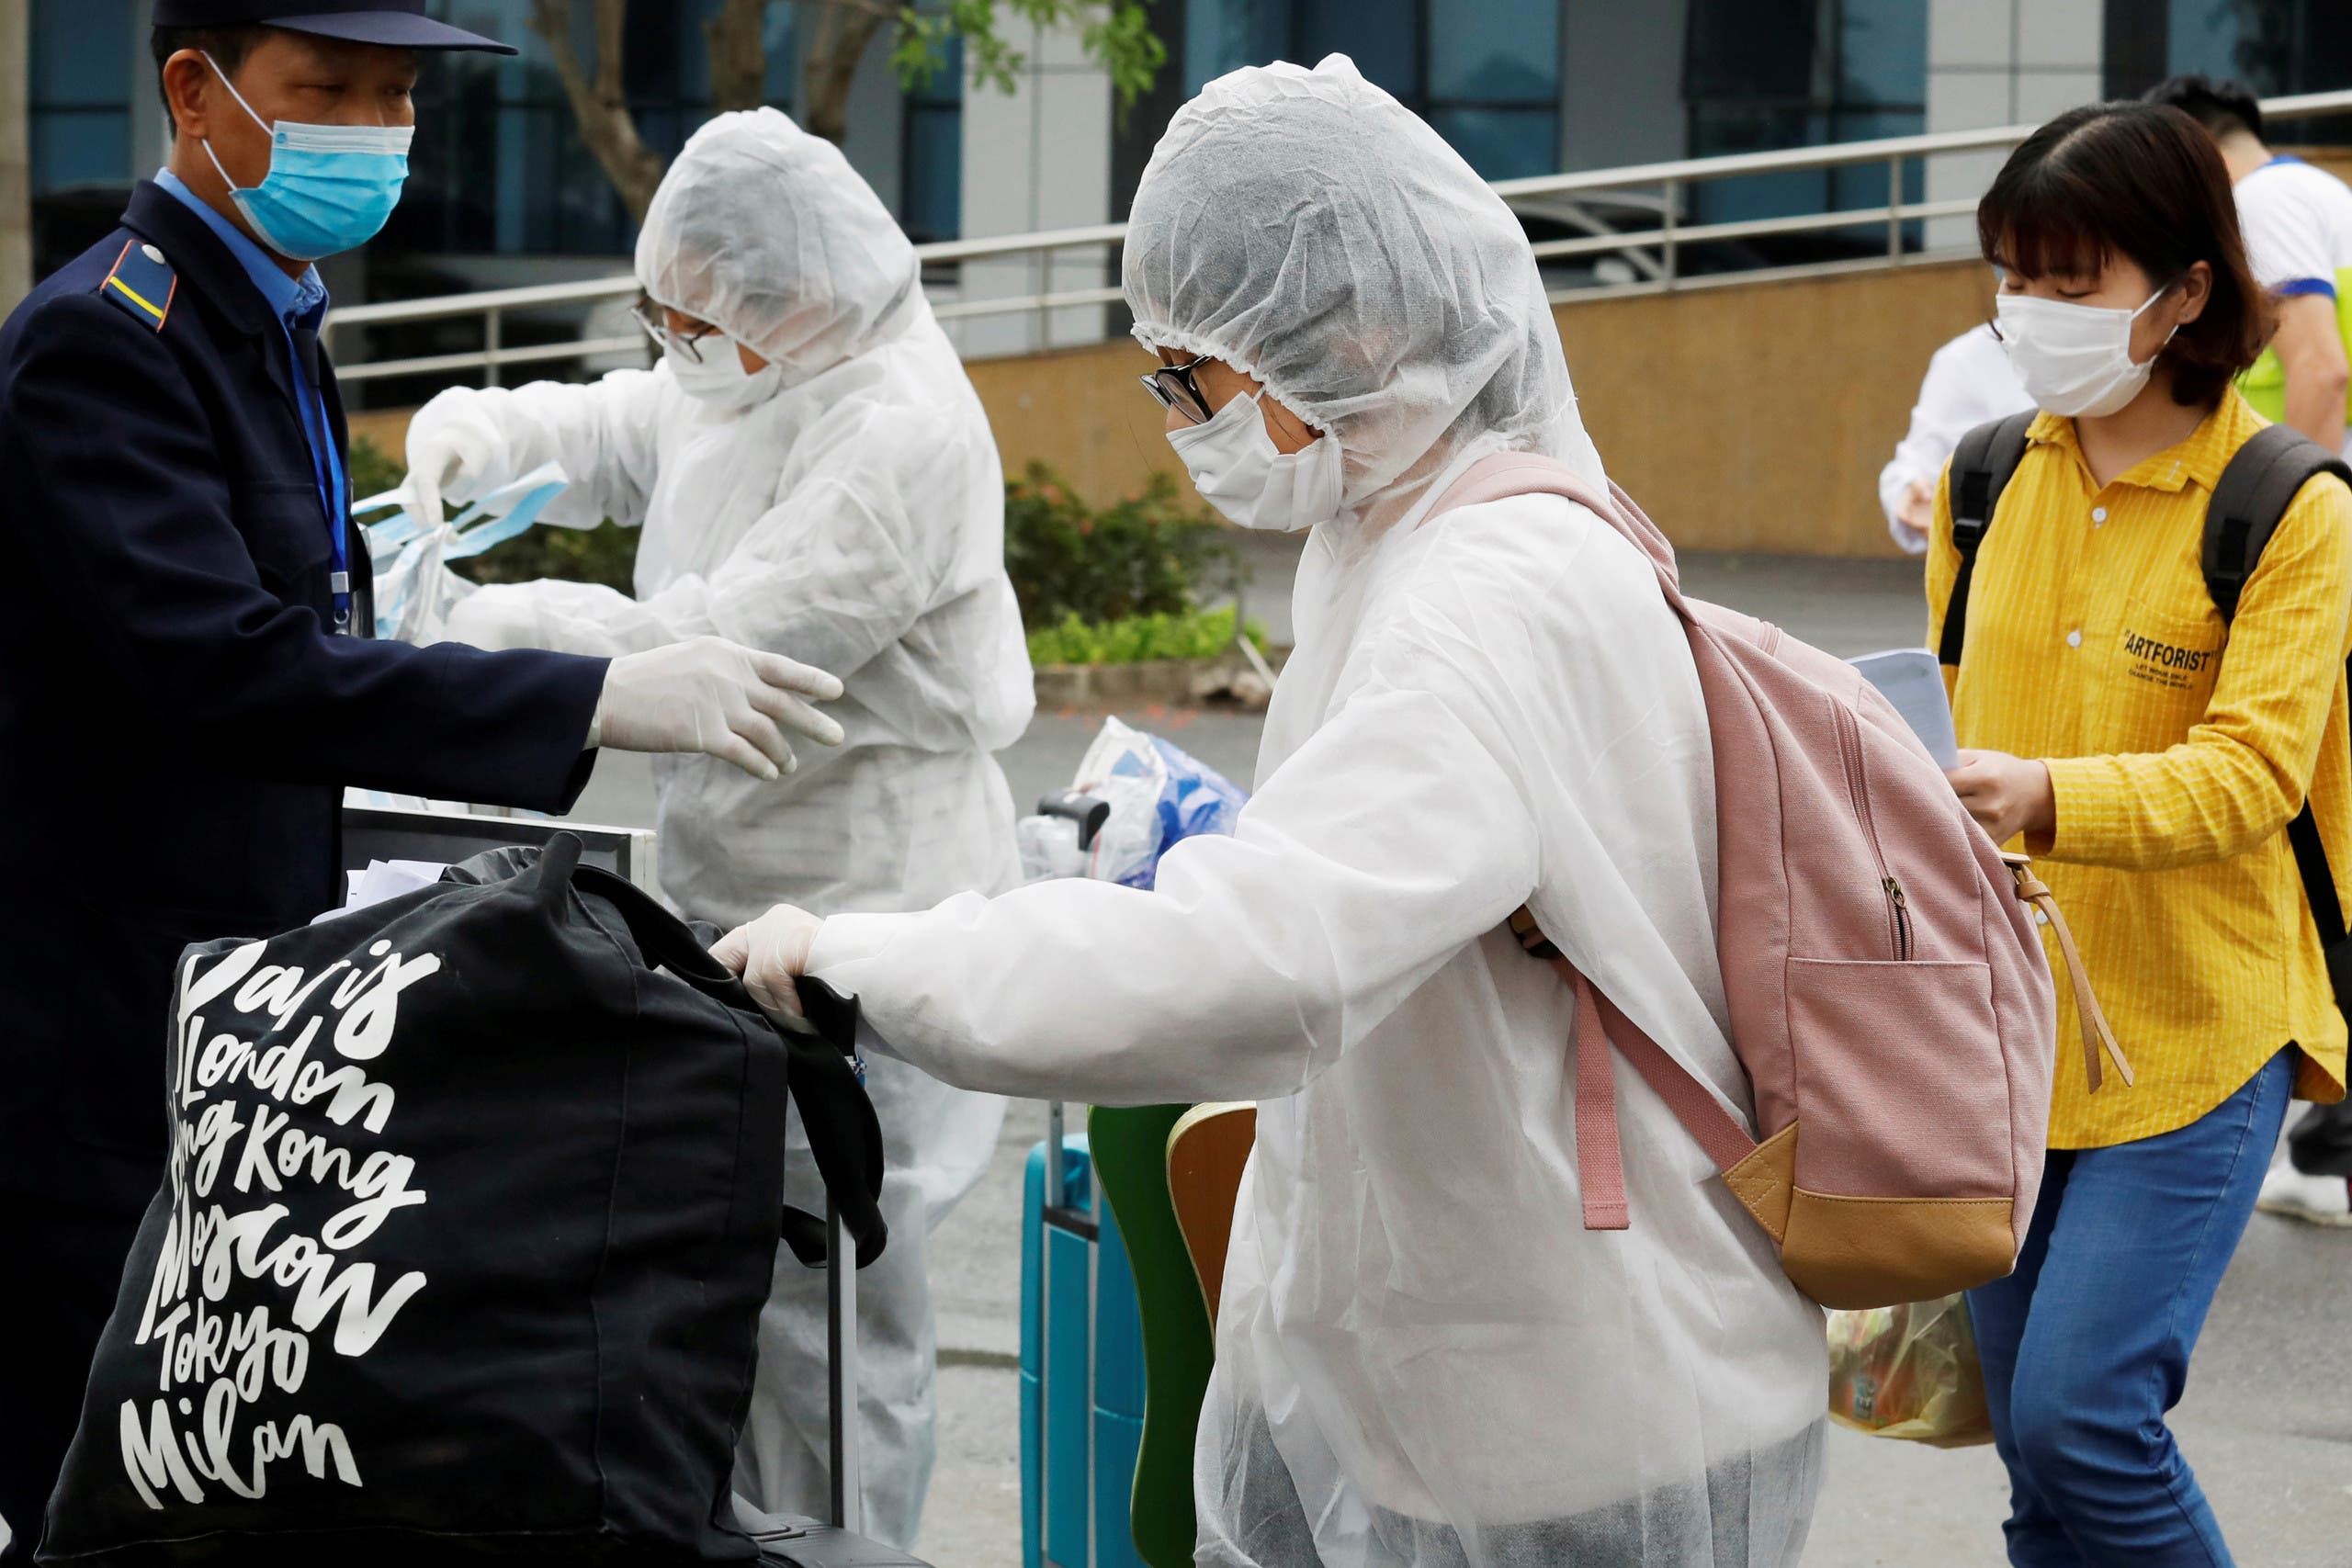 People previously suspected of being infected with the coronavirus wear protective face masks as they leave a hospital after being quarantined for 14 days in Hanoi, Vietnam April 2, 2020. (Reuters)